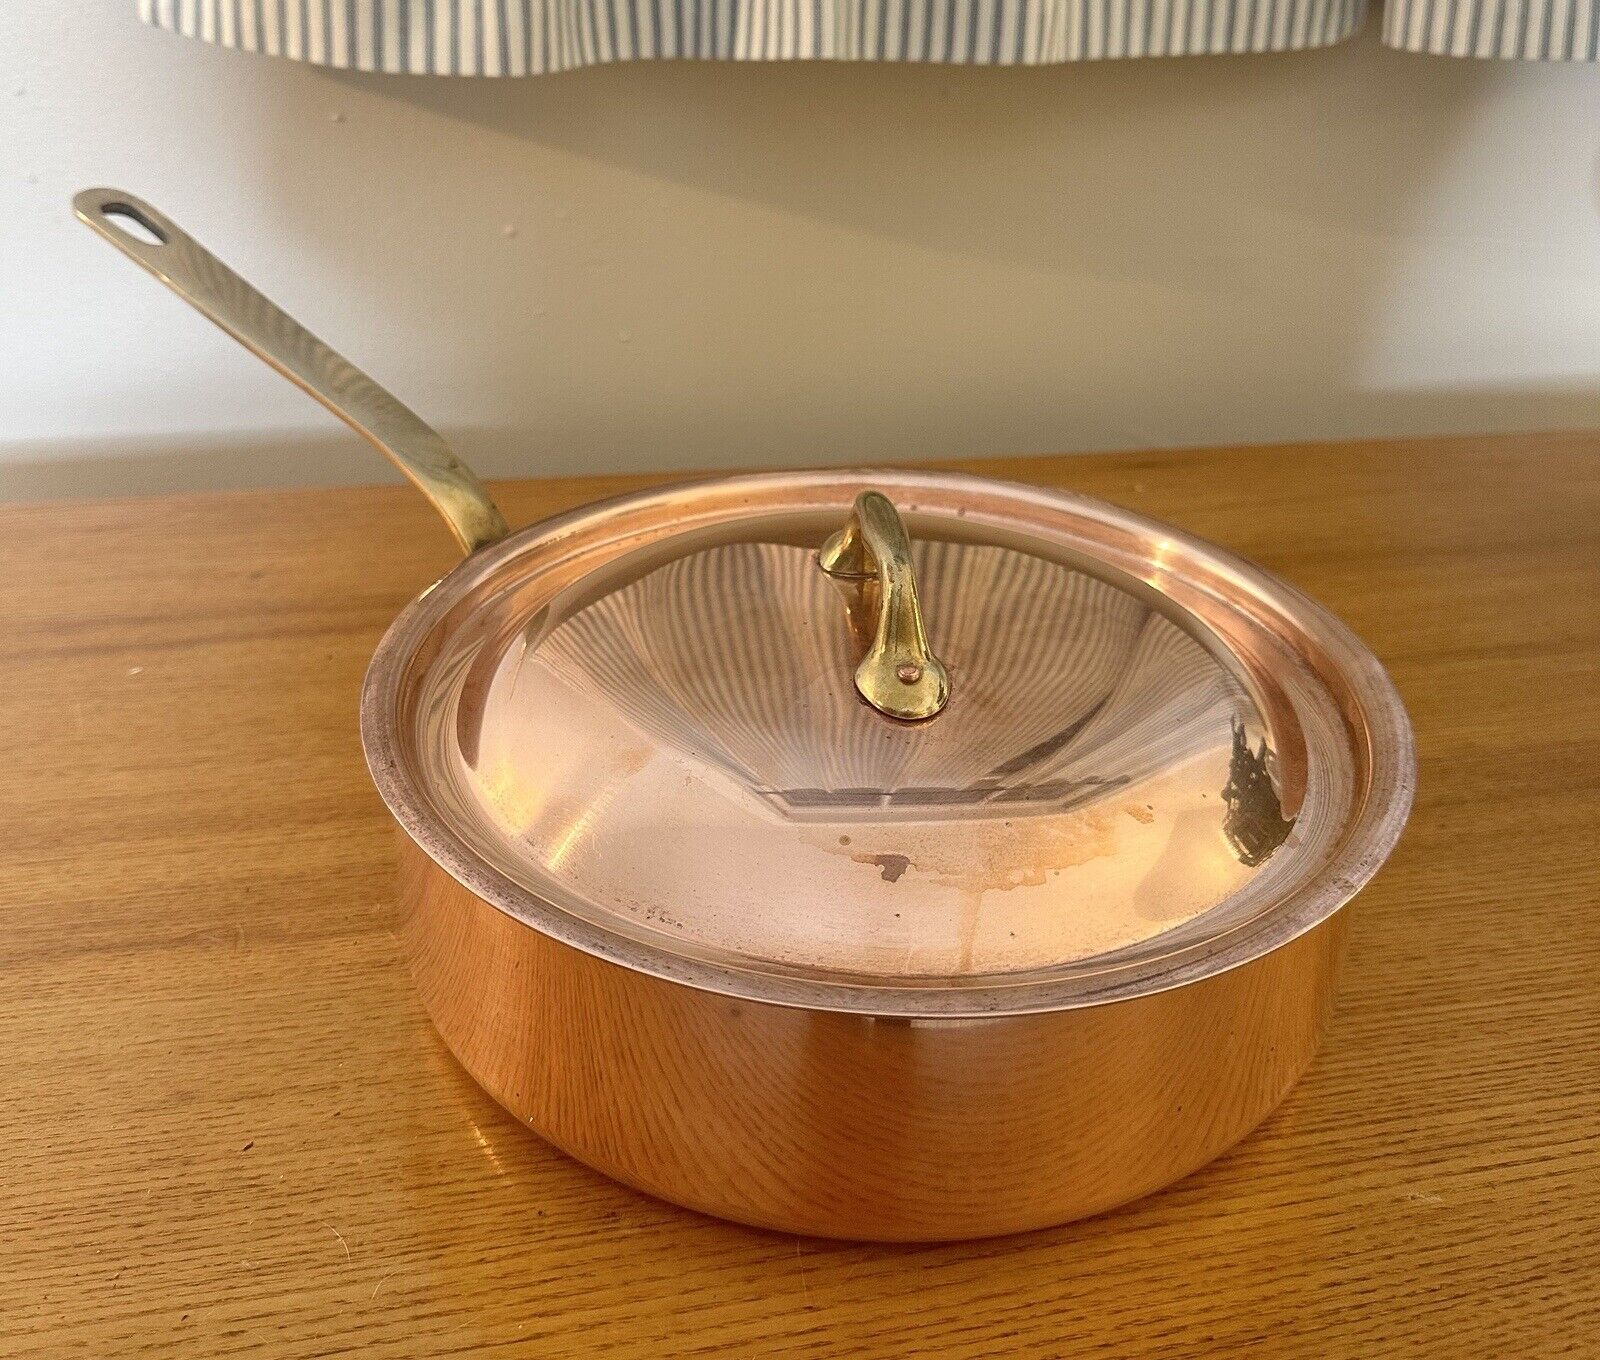 Vintage Mauviel Copper 9.5” Sauté Pan and Lid Made in France Original Condition